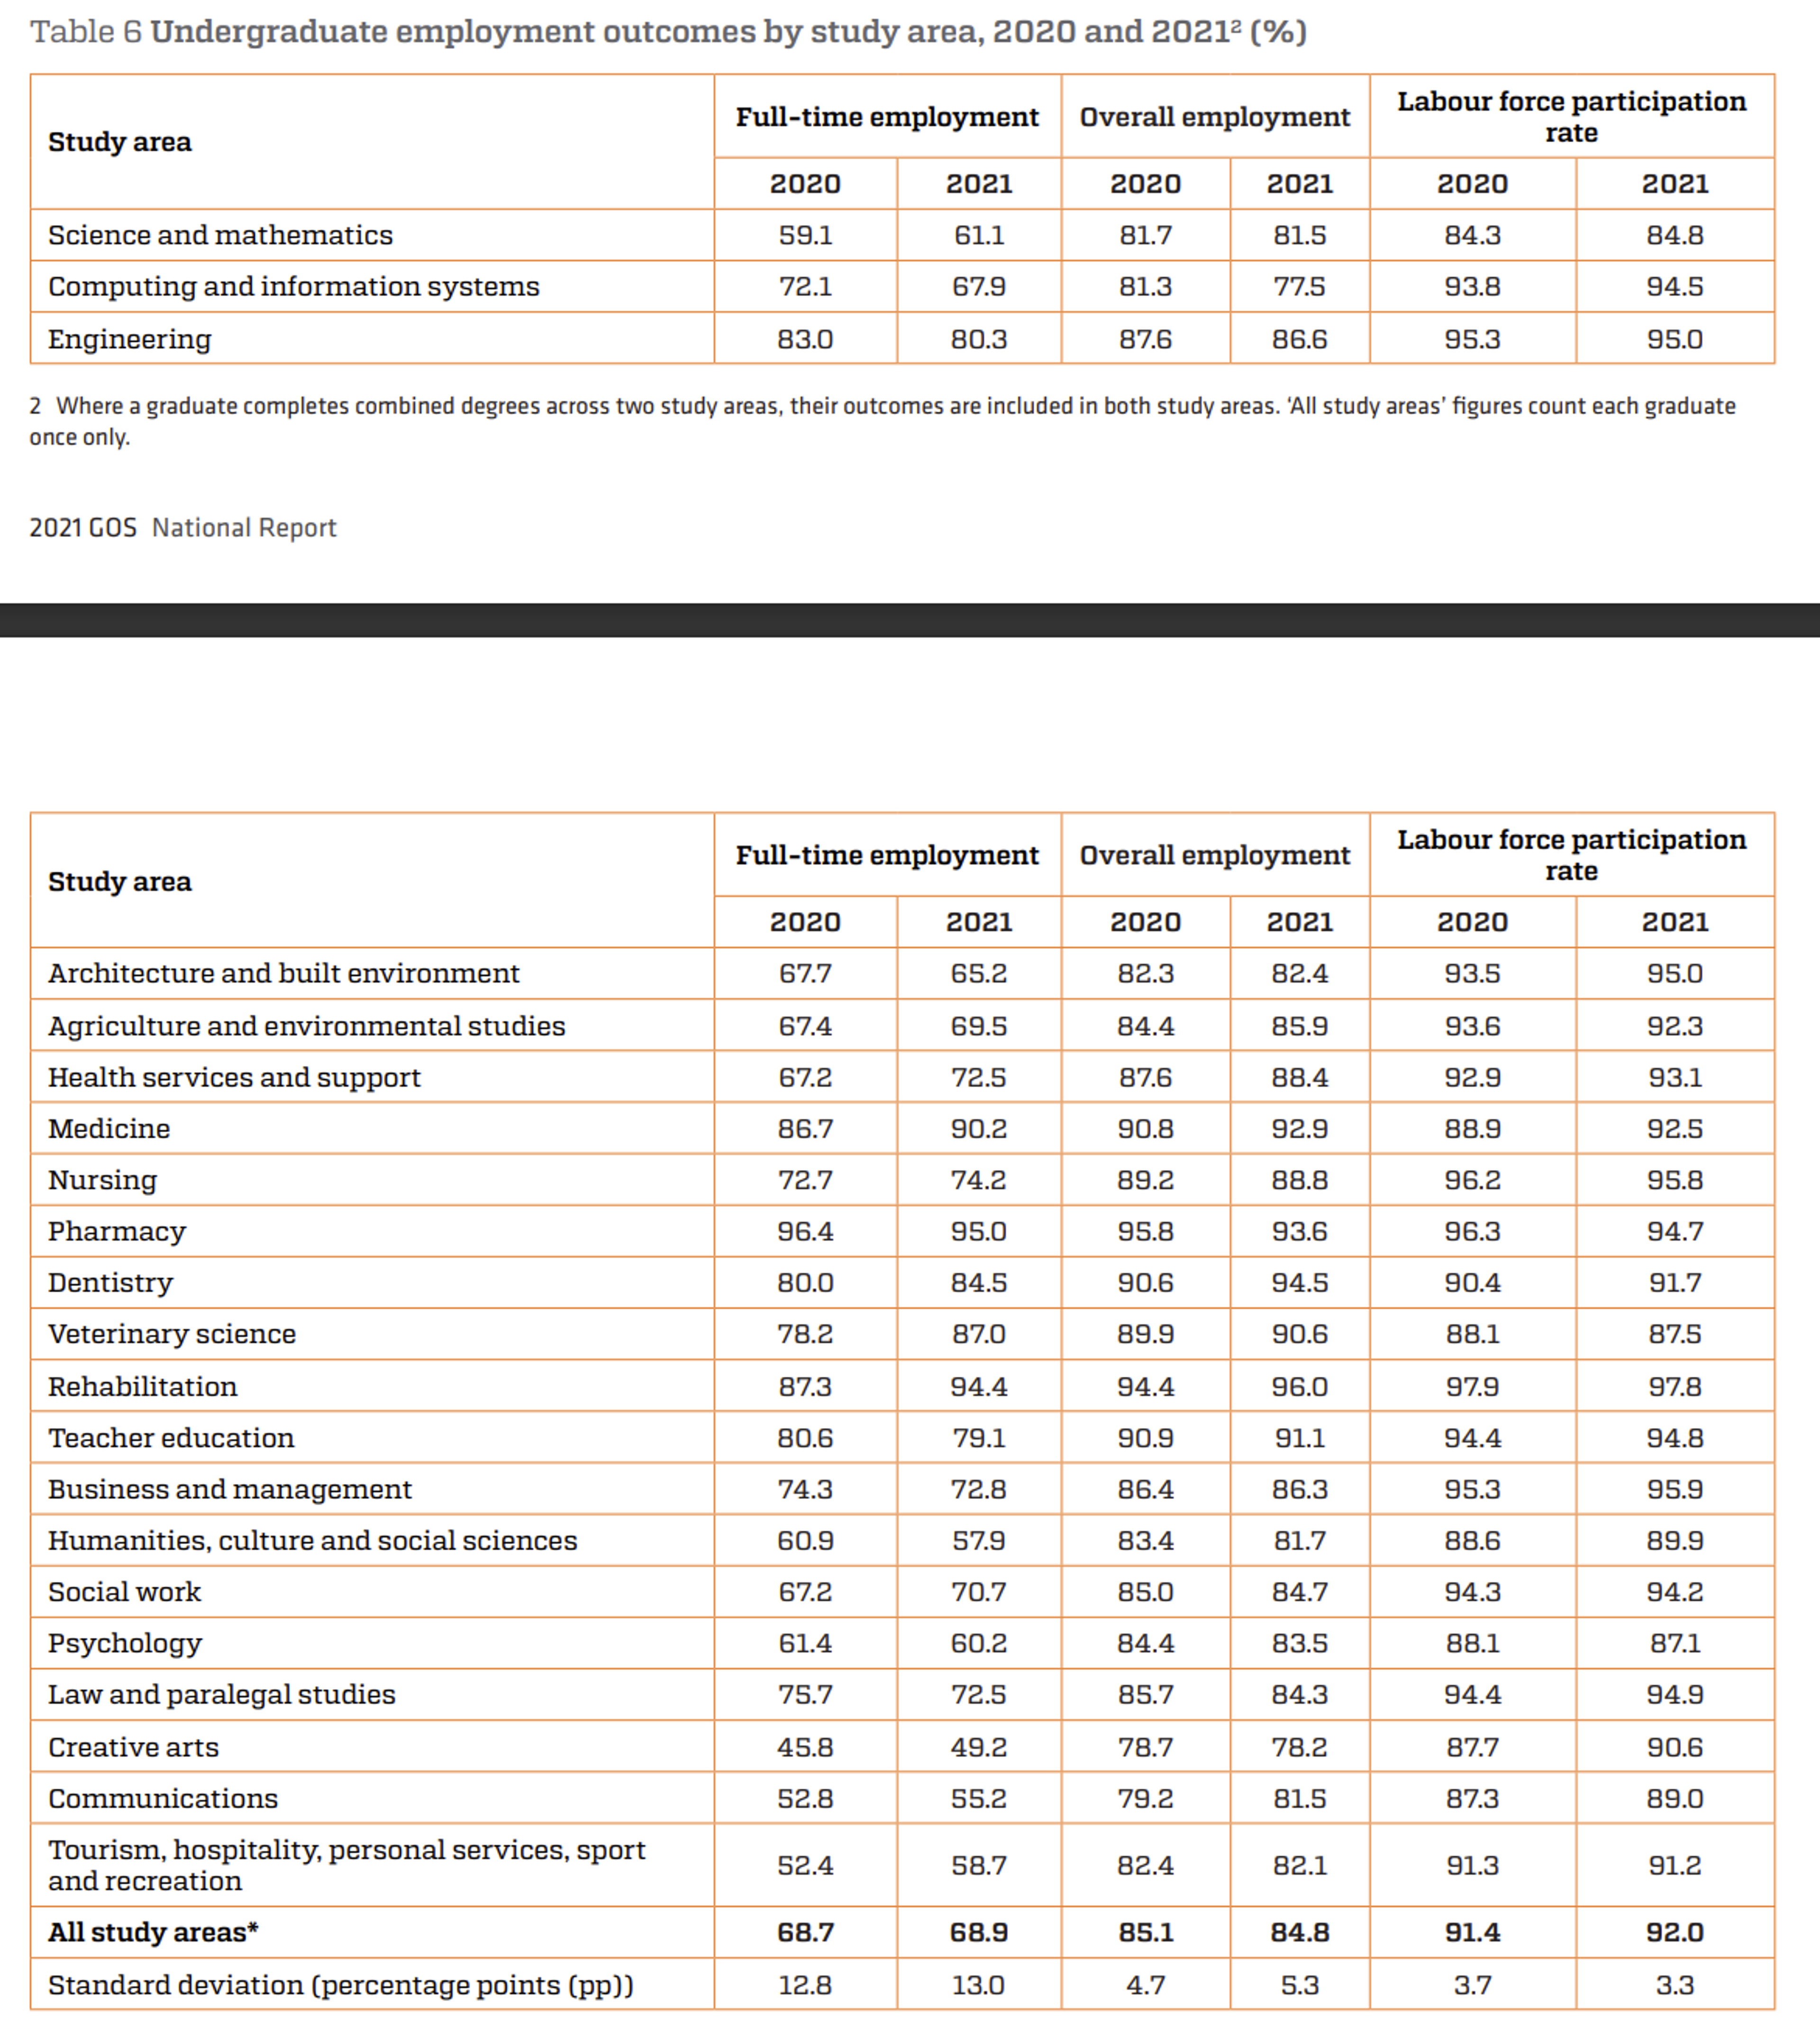 A table depicting undergraduate employment outcomes by study area